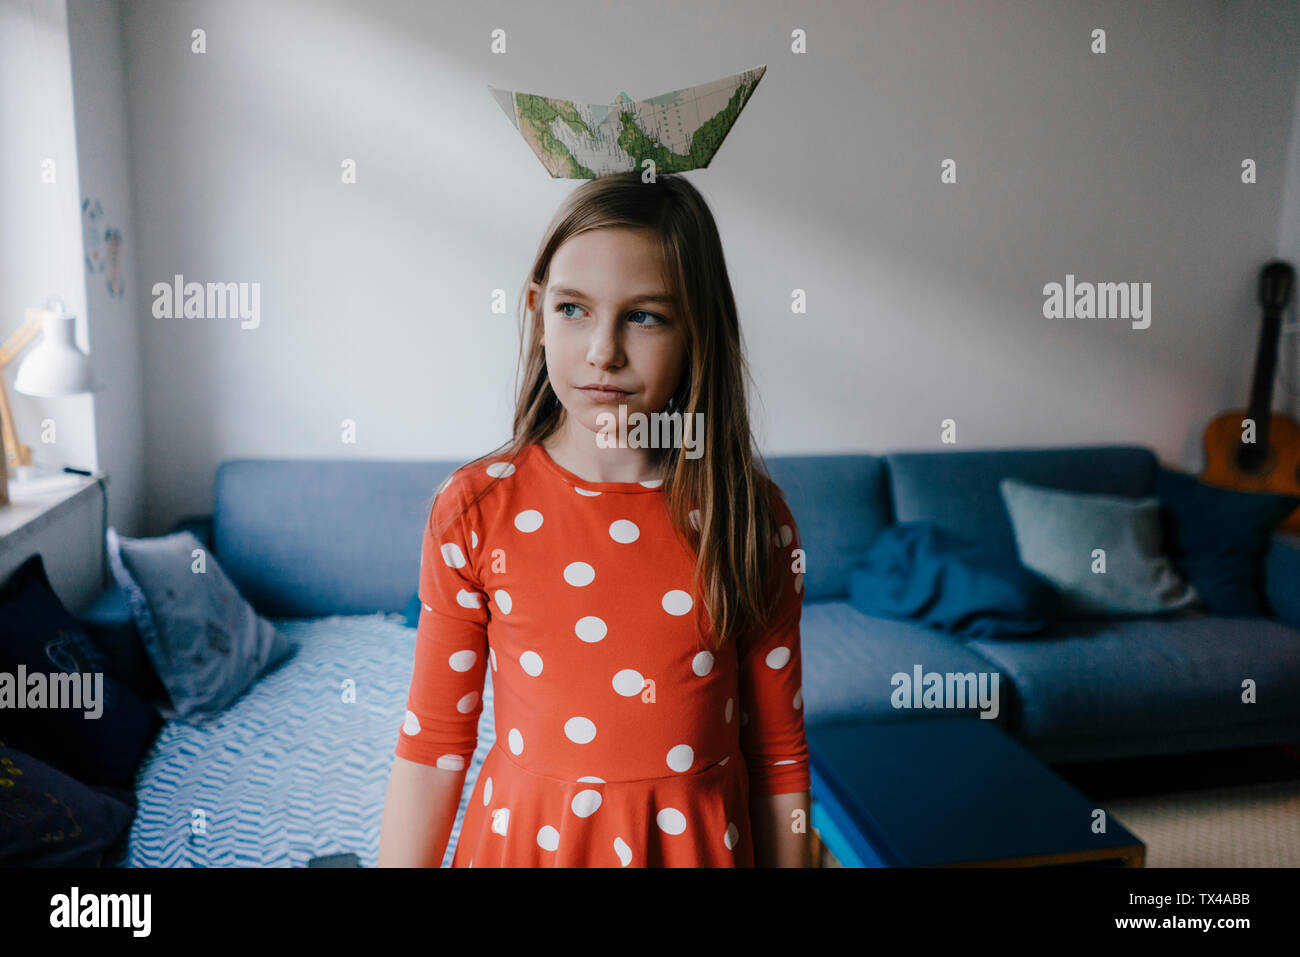 Girl balancing paper boat on her head at home Stock Photo